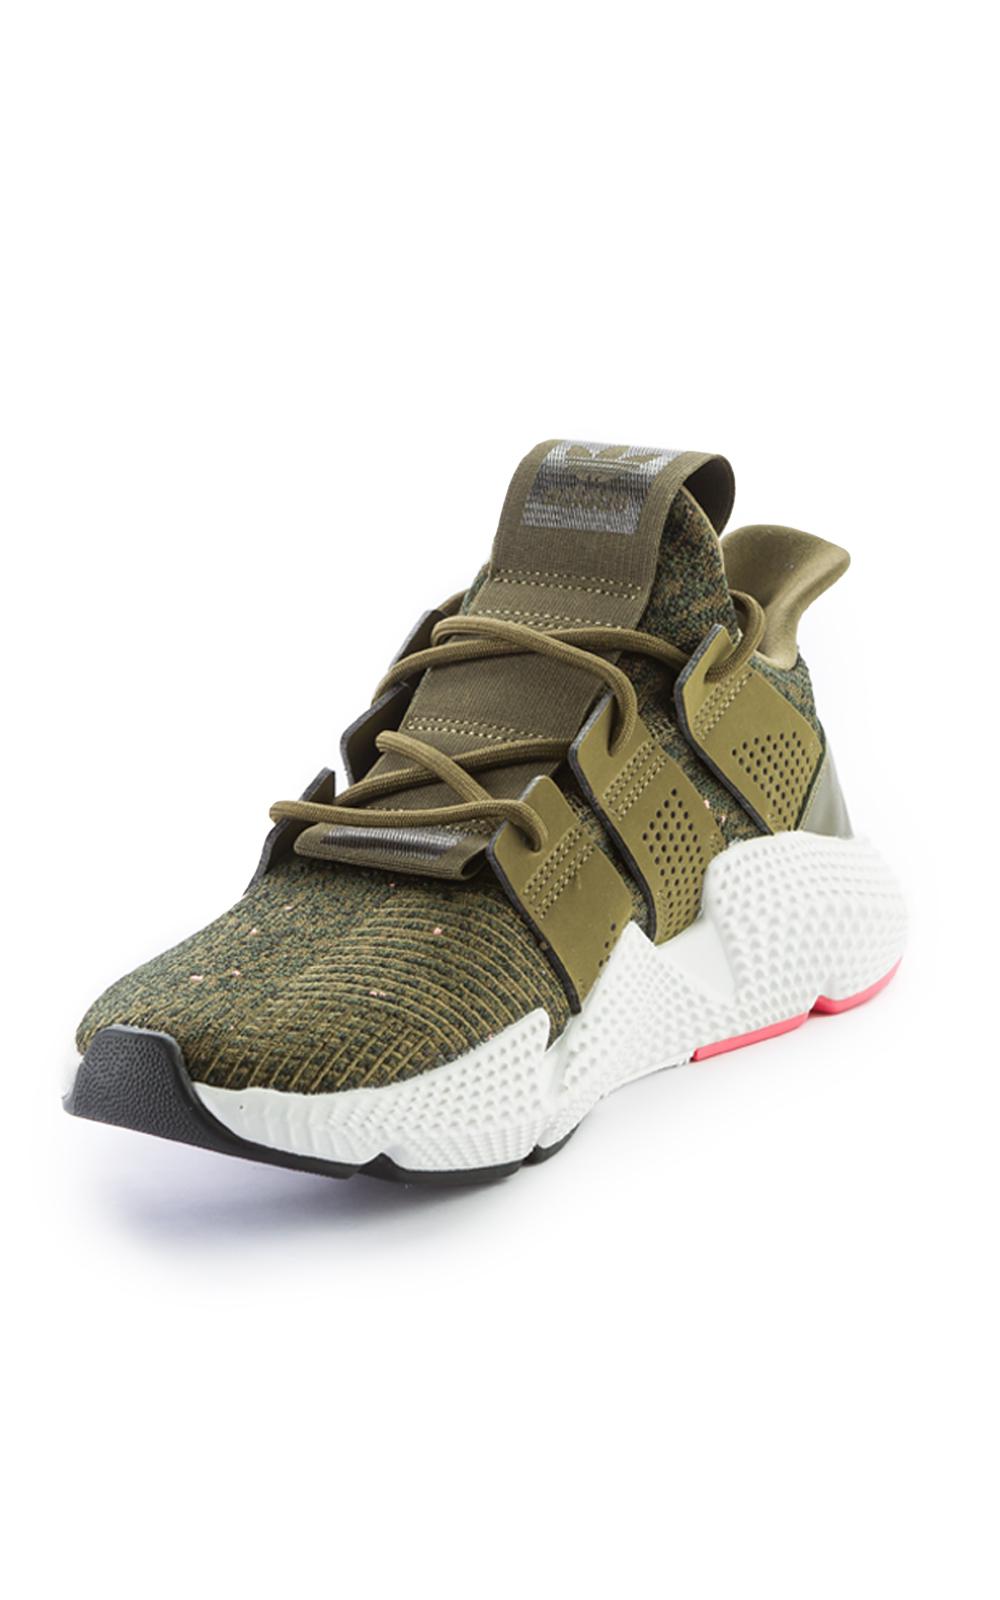 adidas prophere green, large retail UP TO 59% OFF - statehouse.gov.sl